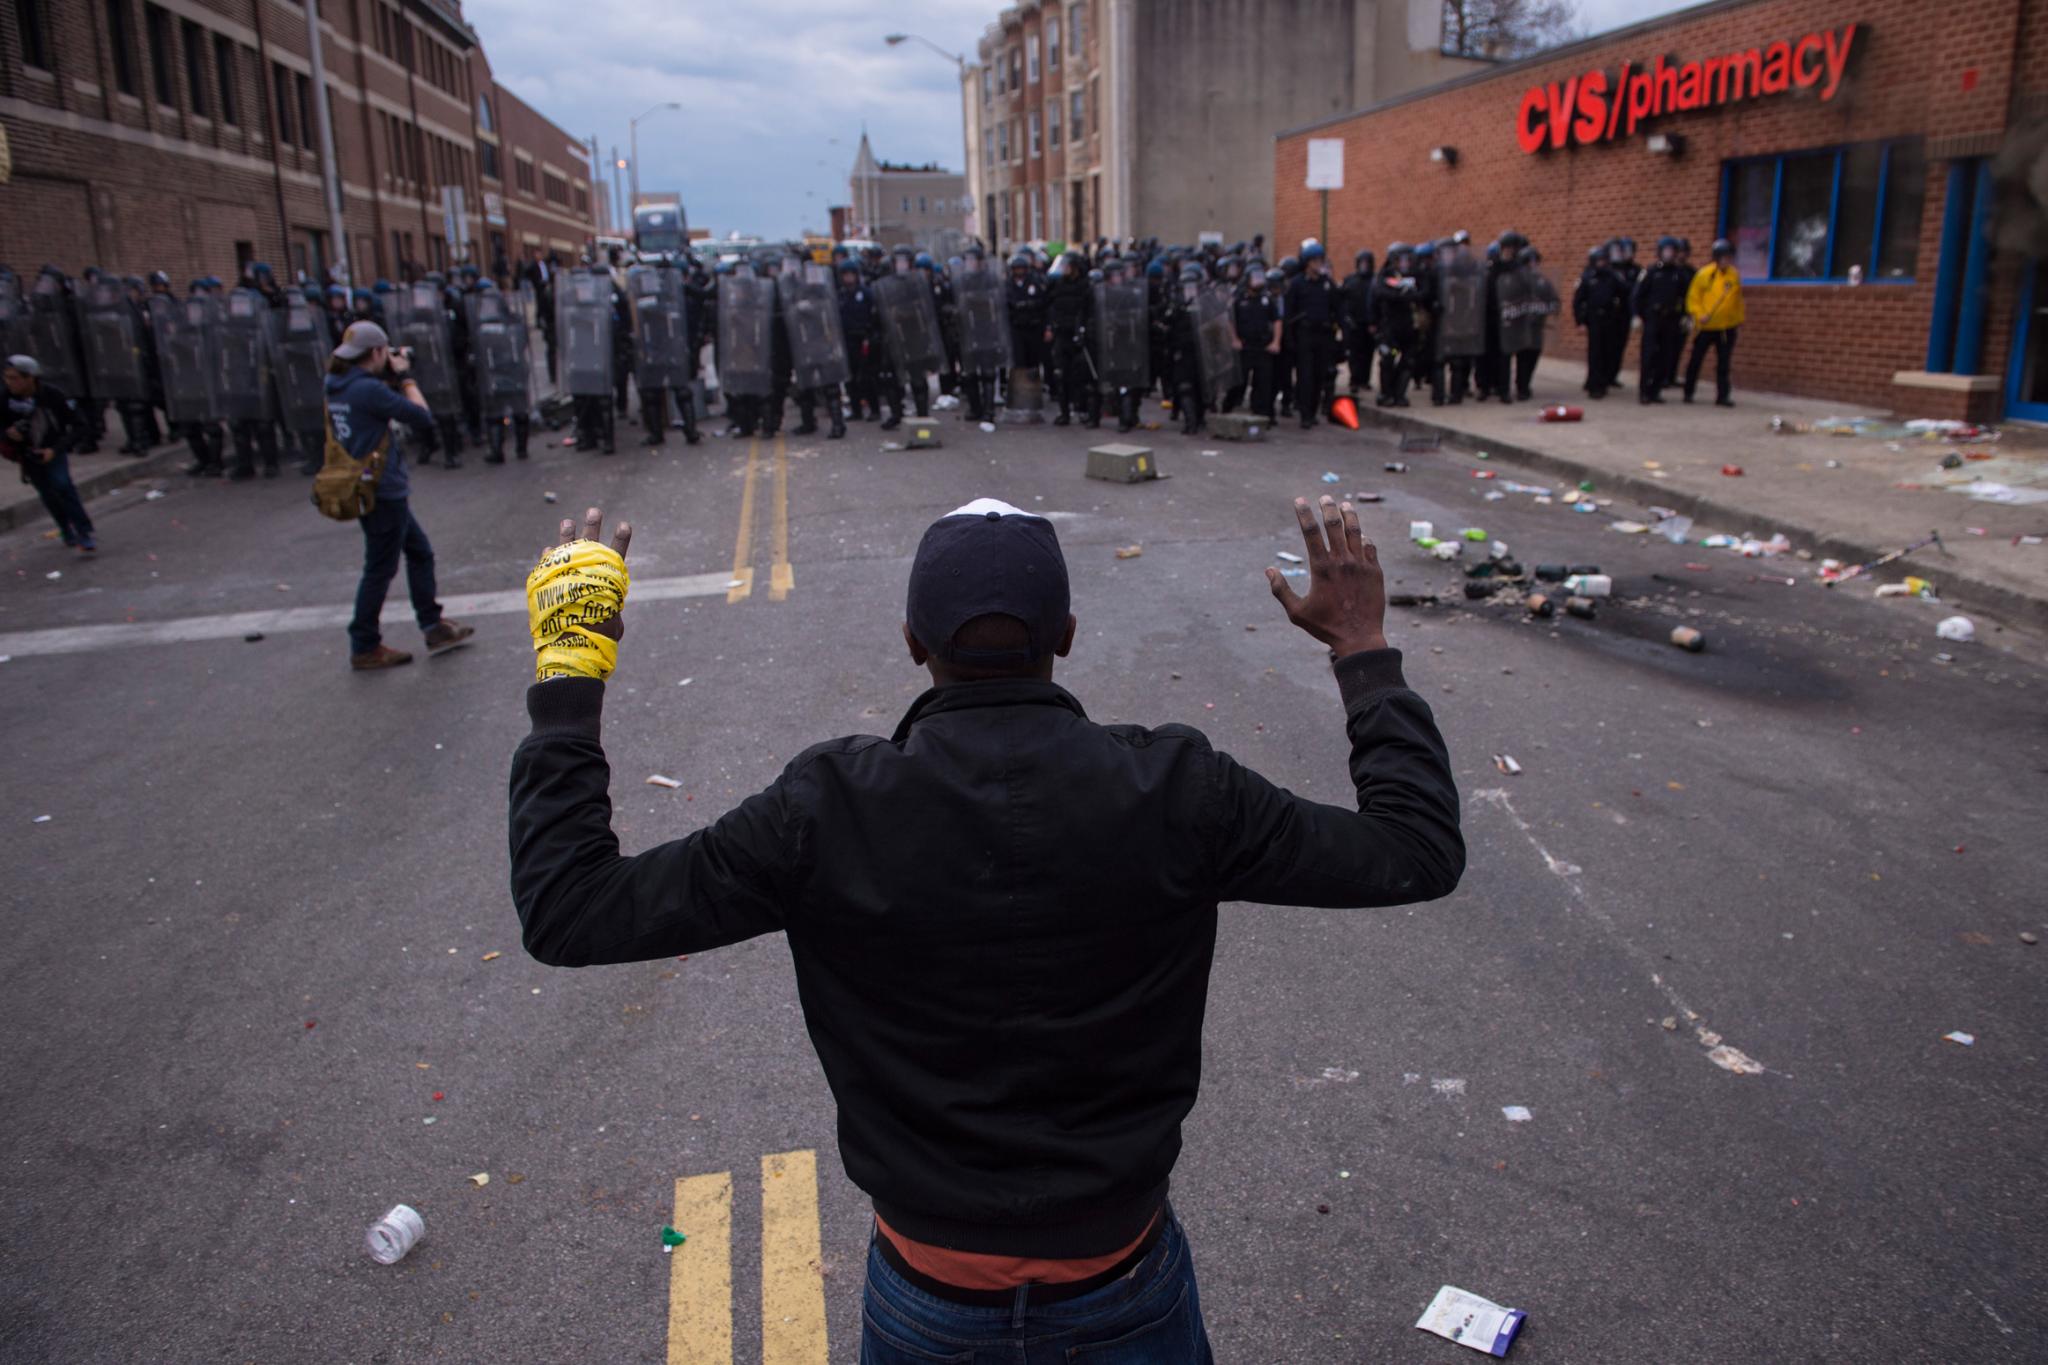 A Comprehensive Timeline of the Freddie Gray Tragedy